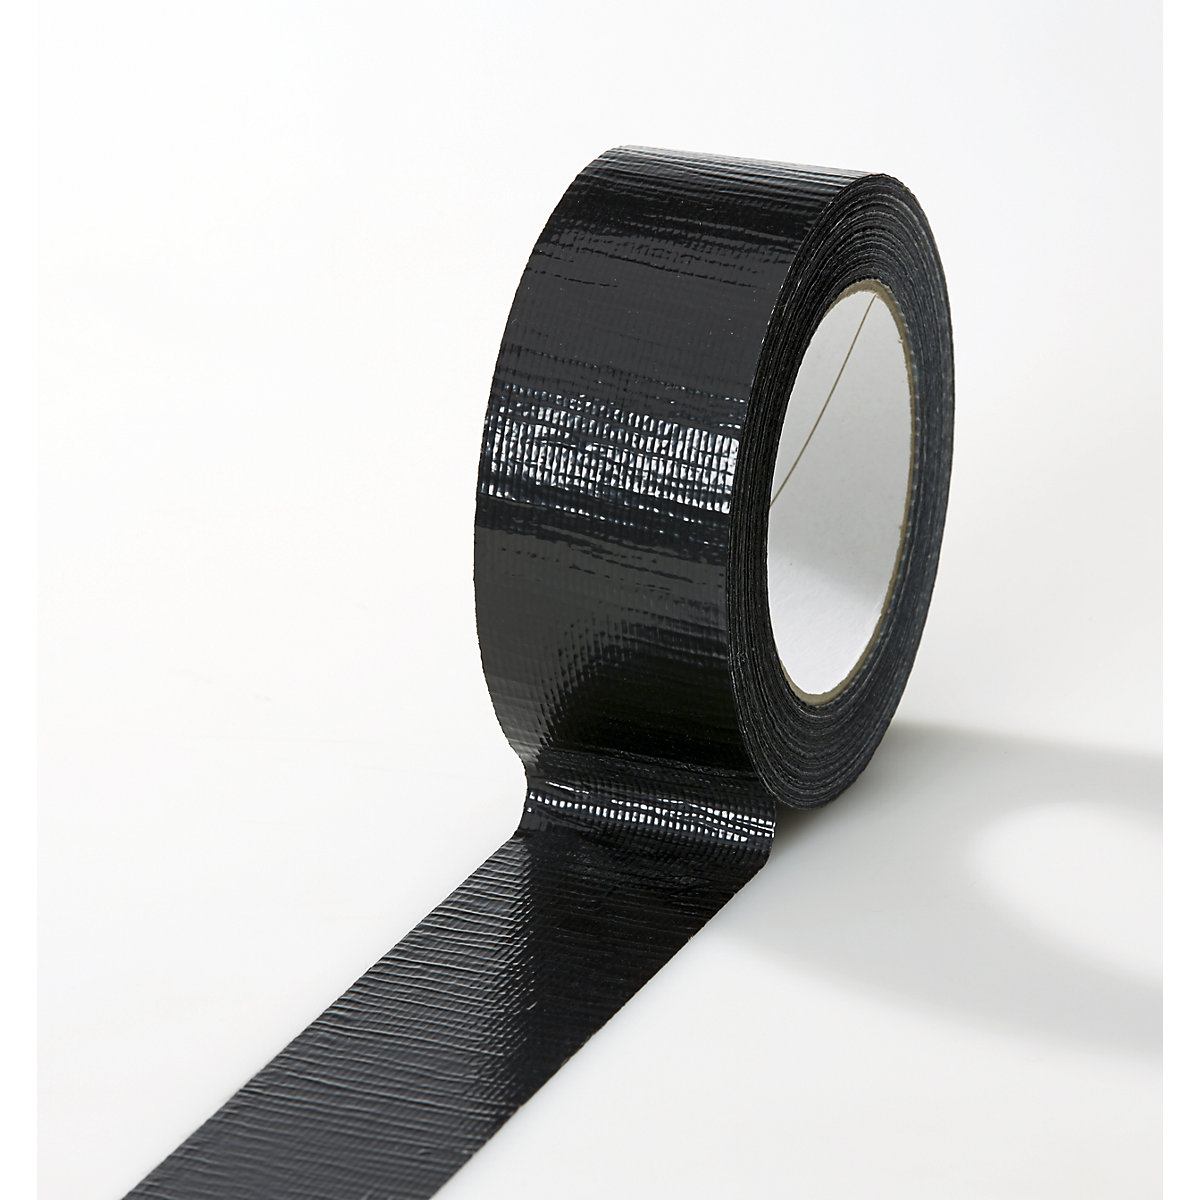 Fabric tape, in different colours, pack of 24 rolls, black, tape width 38 mm-4